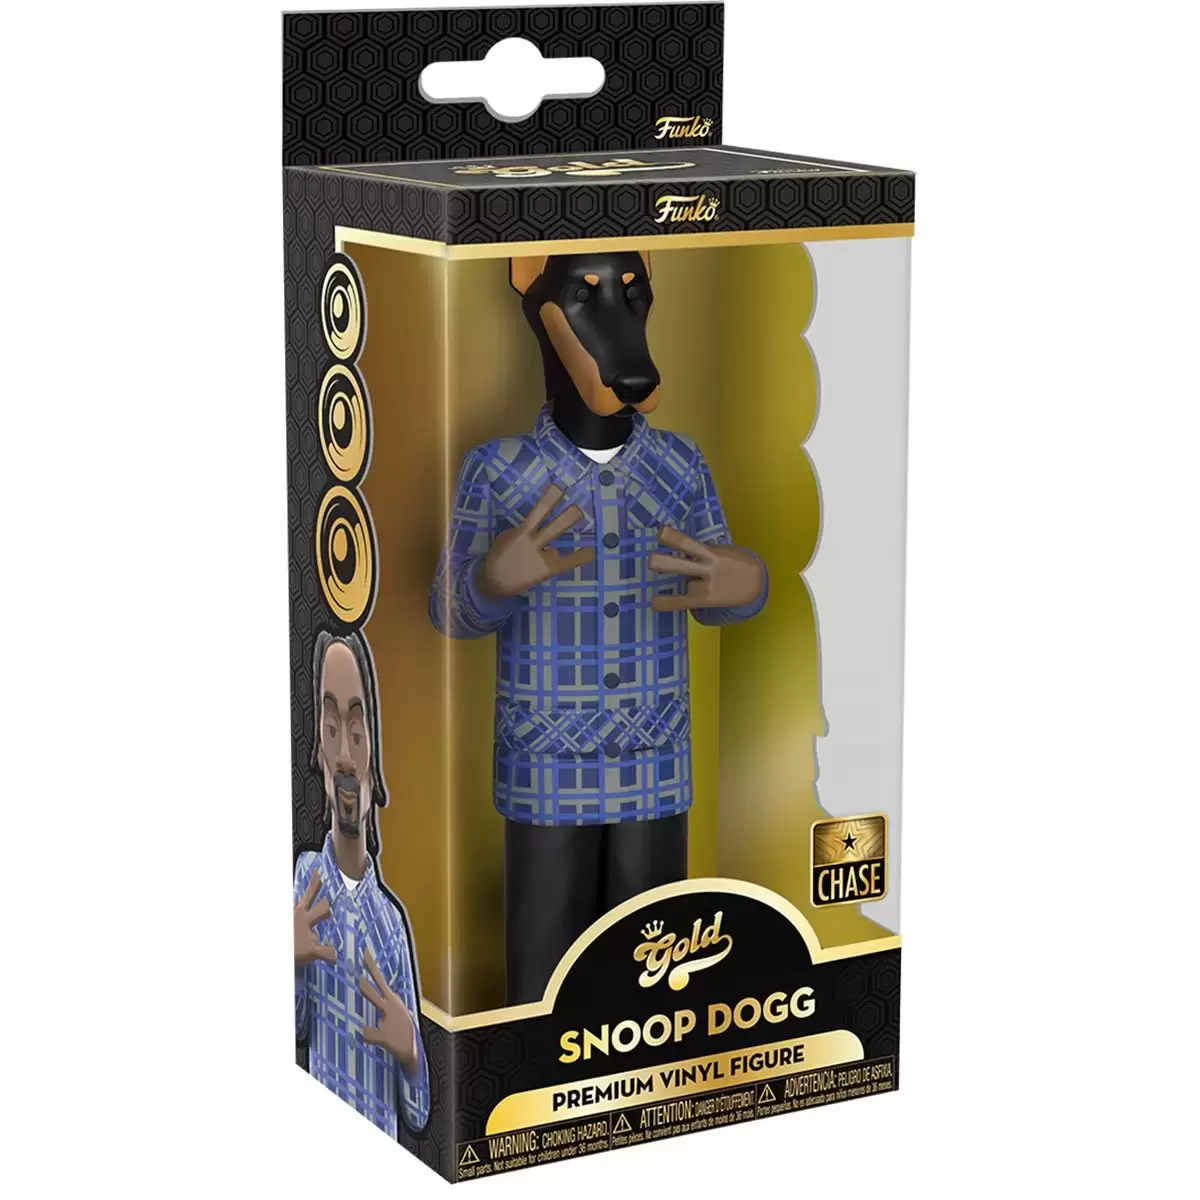 Snoop Dogg - Snoop Dogg Chase - Funko Gold action figure